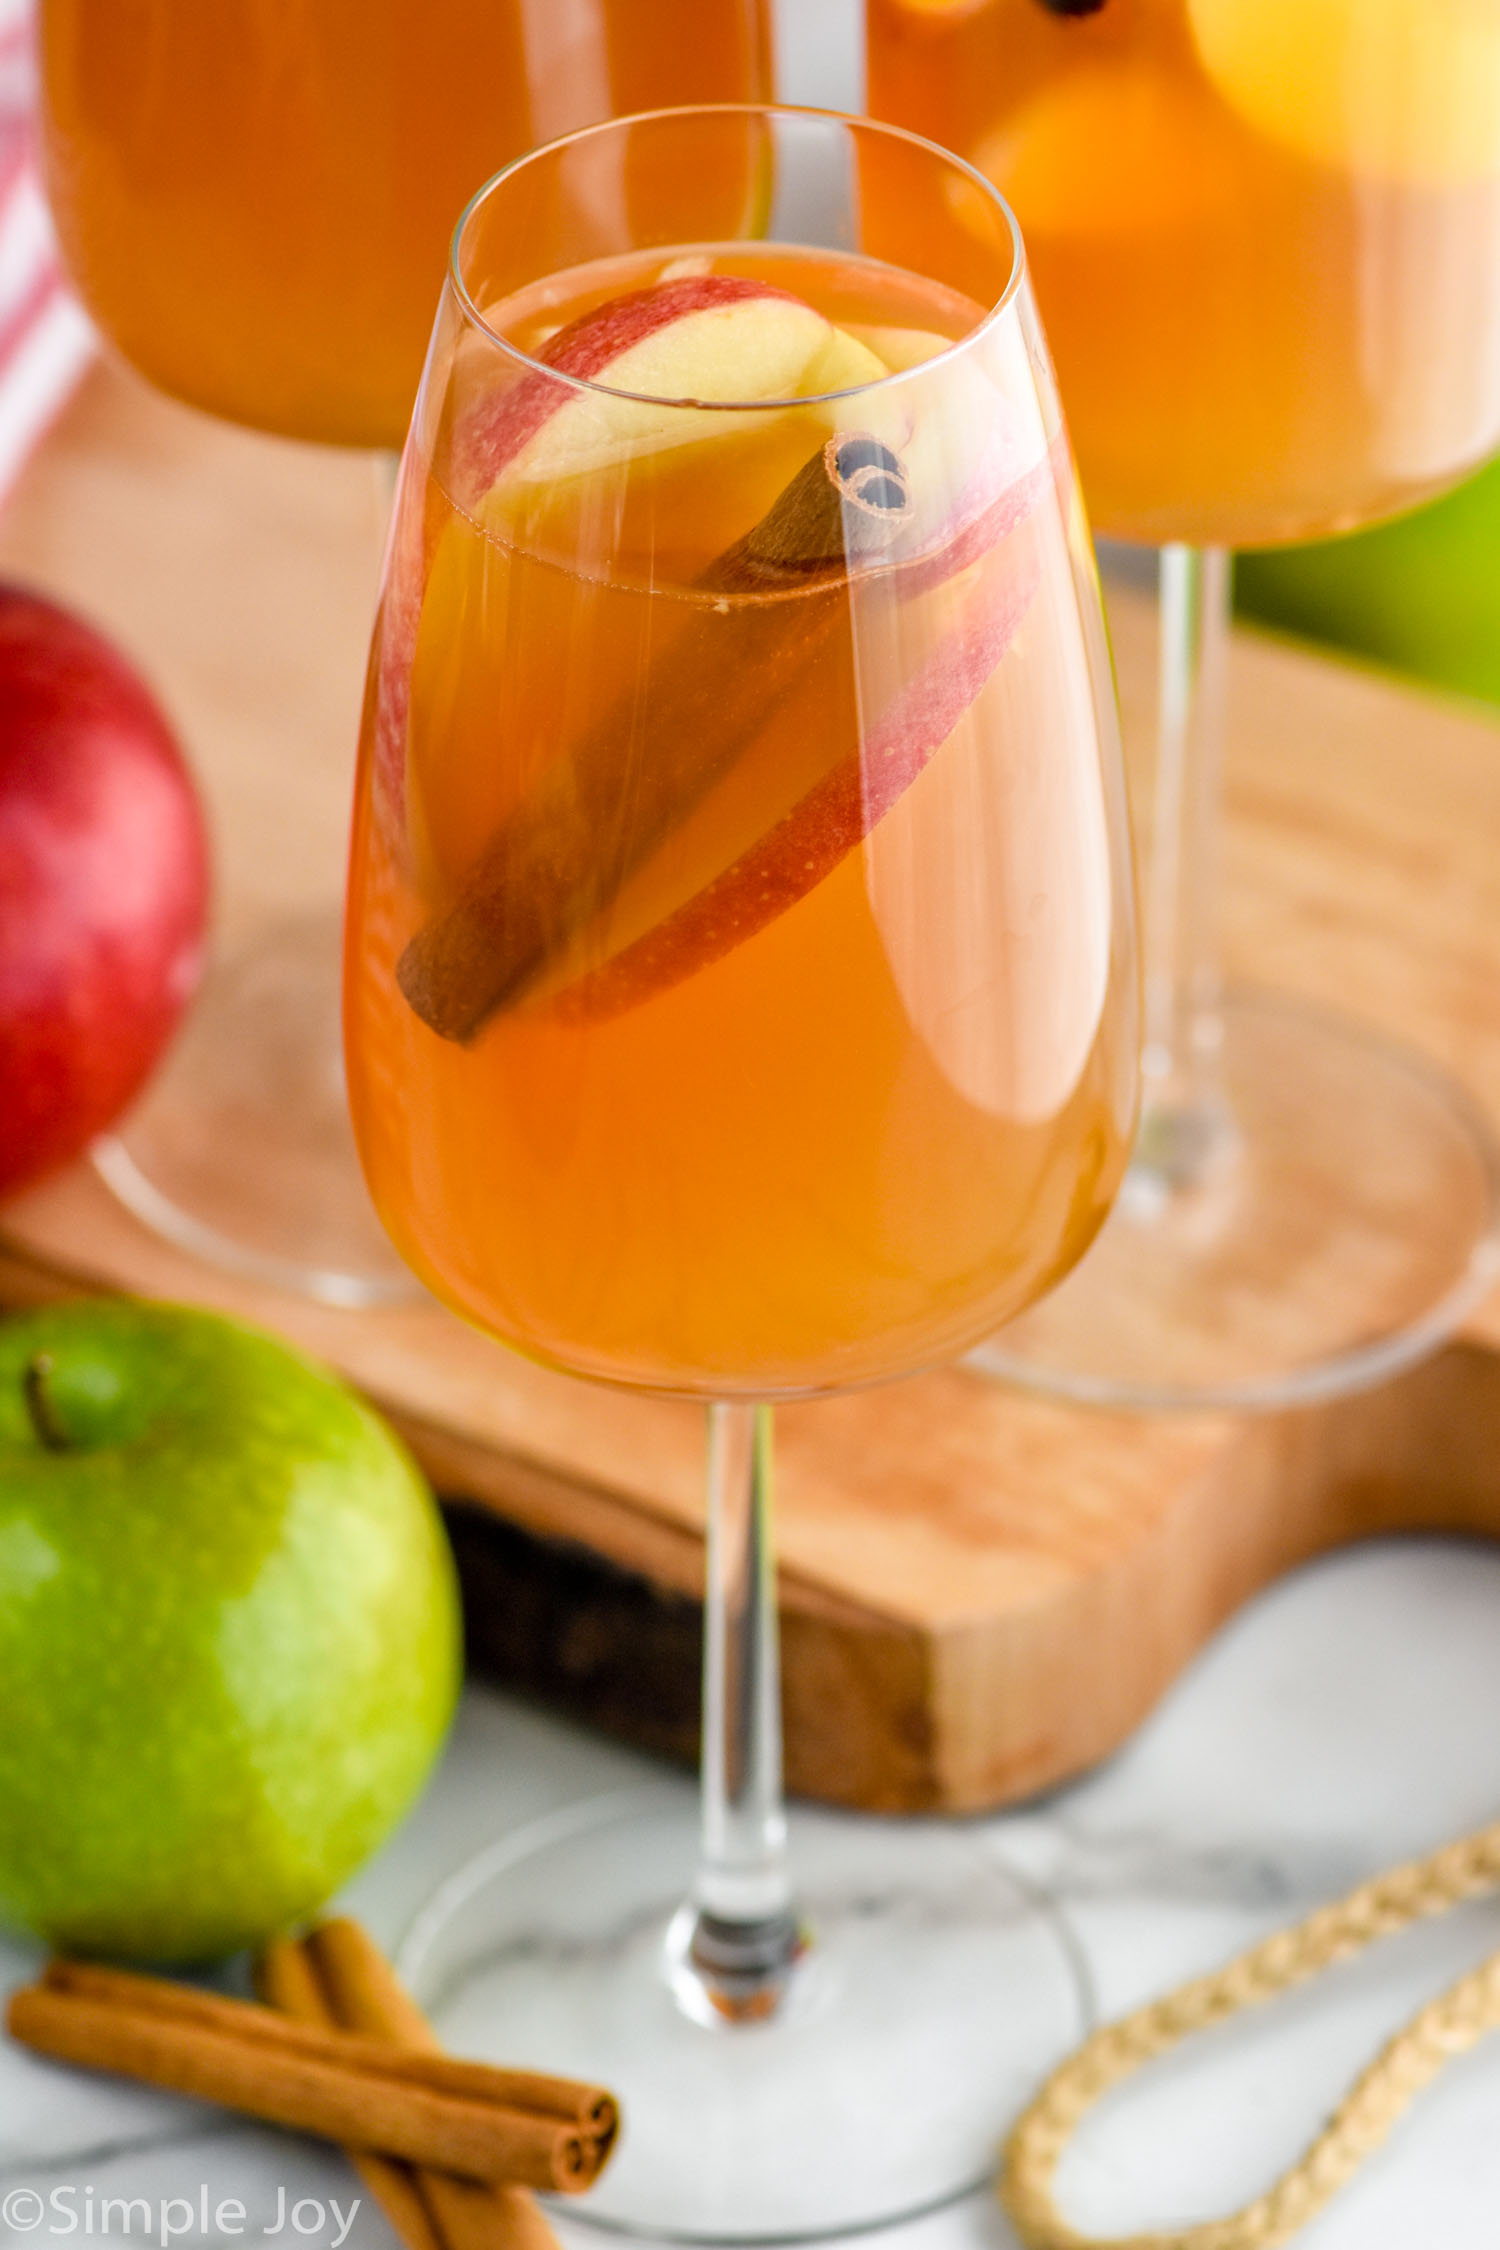 Photo of a glass of Apple Cider Sangria garnished with apples slices and cinnamon sticks.